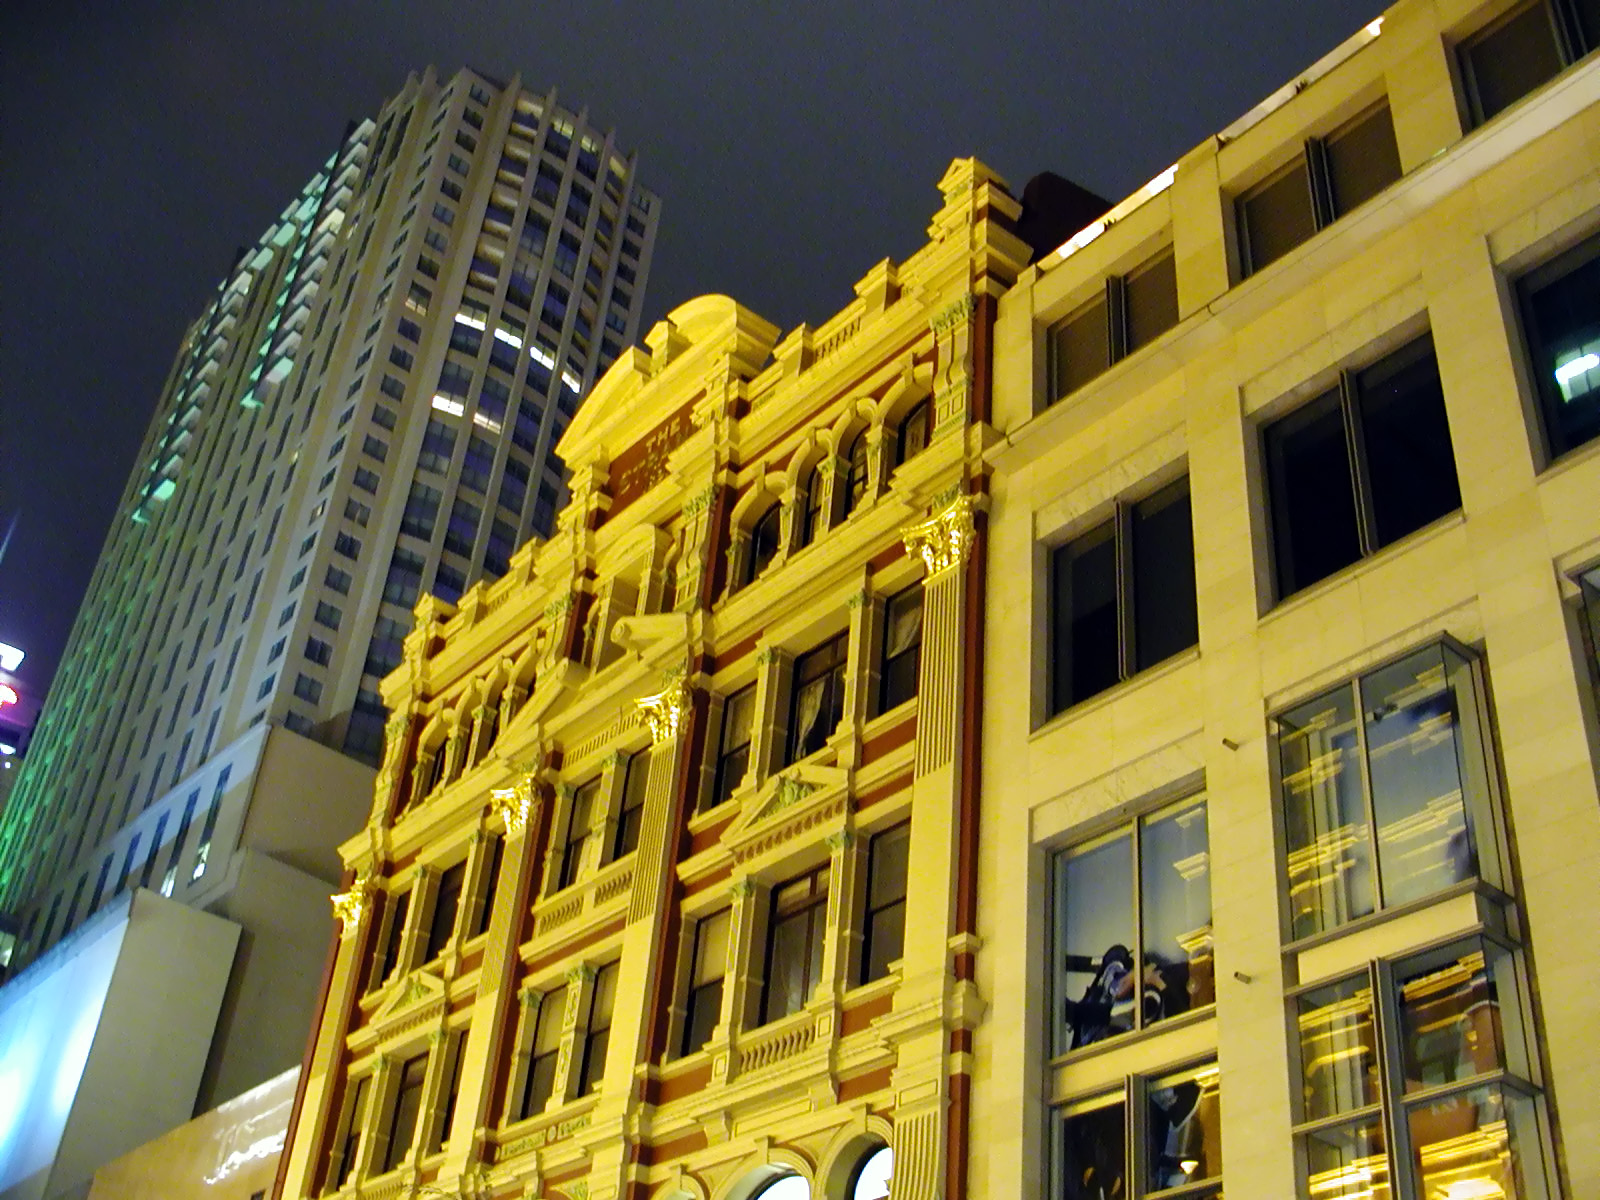 16-Jun-2001 22:16 - Sydney - Shop roofline on Pitt Street, with the Merchant Court Hotel in the background